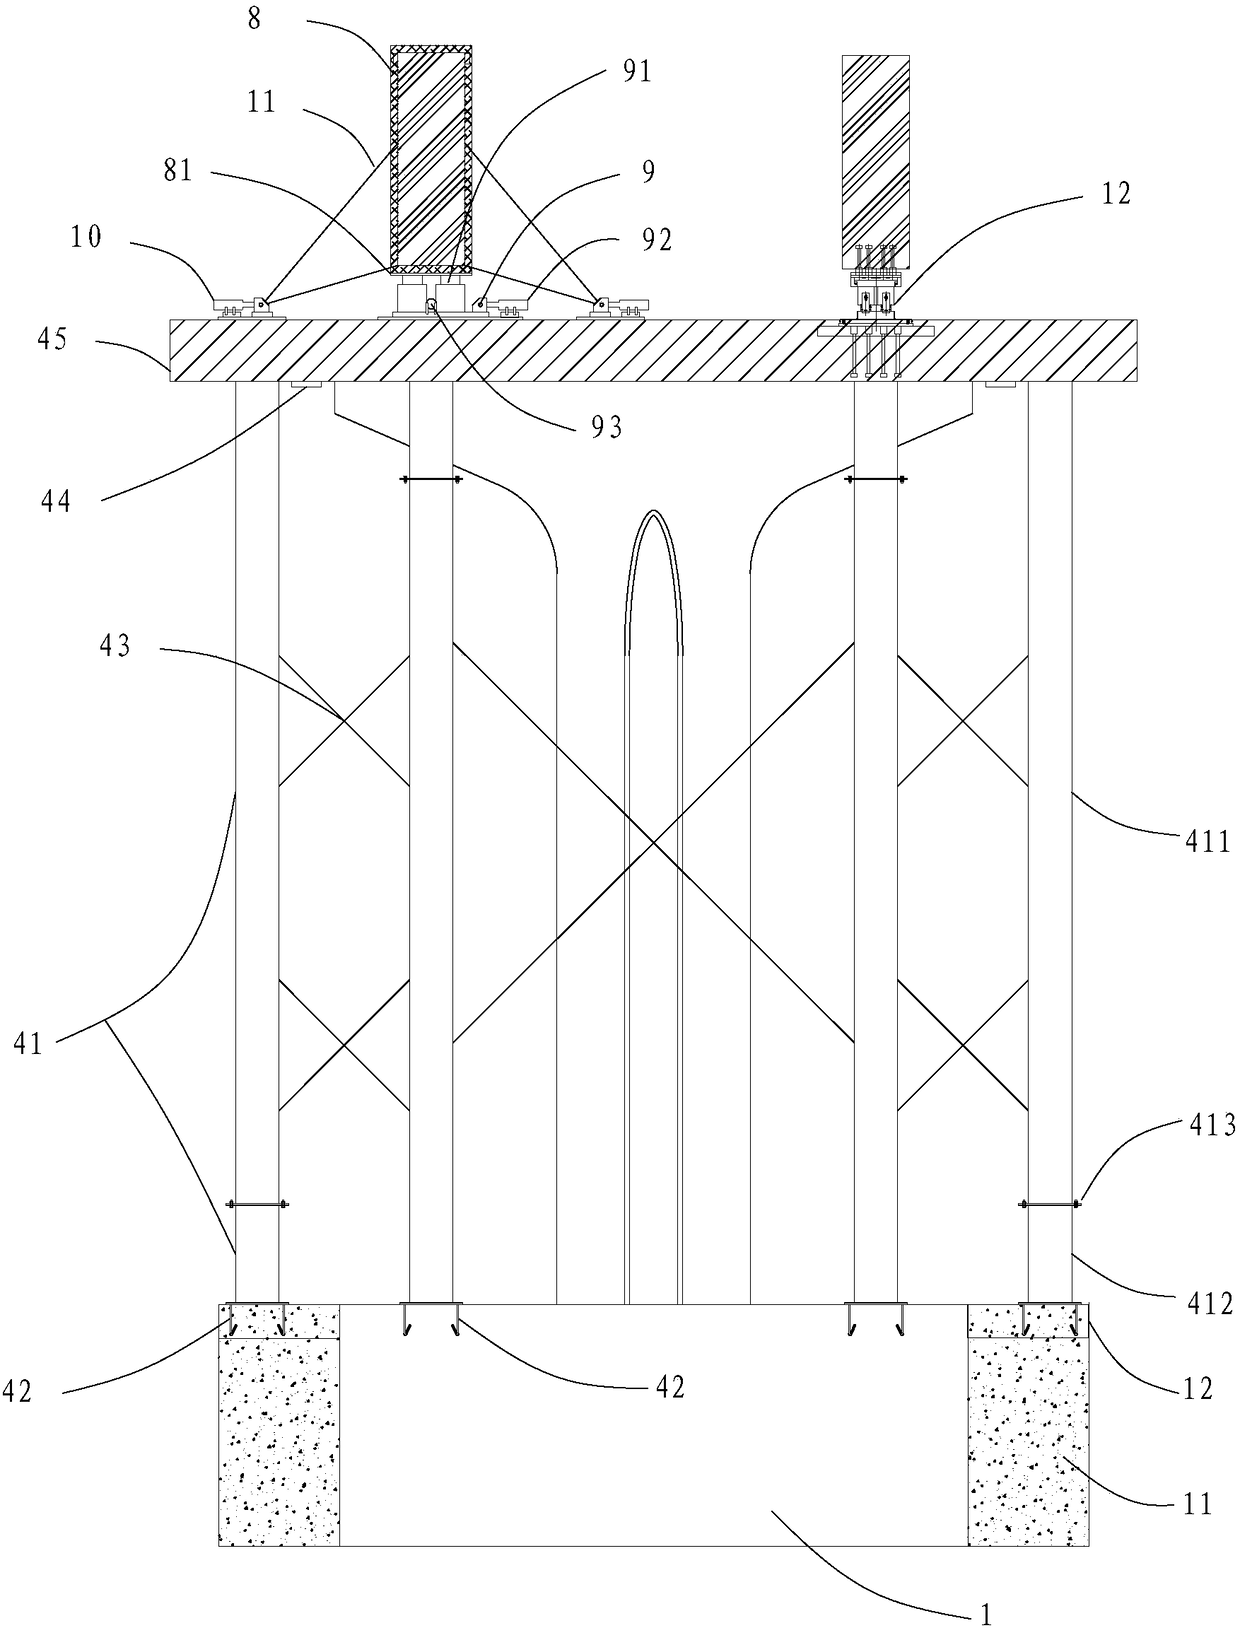 Construction method of straddle-type monorail track beam